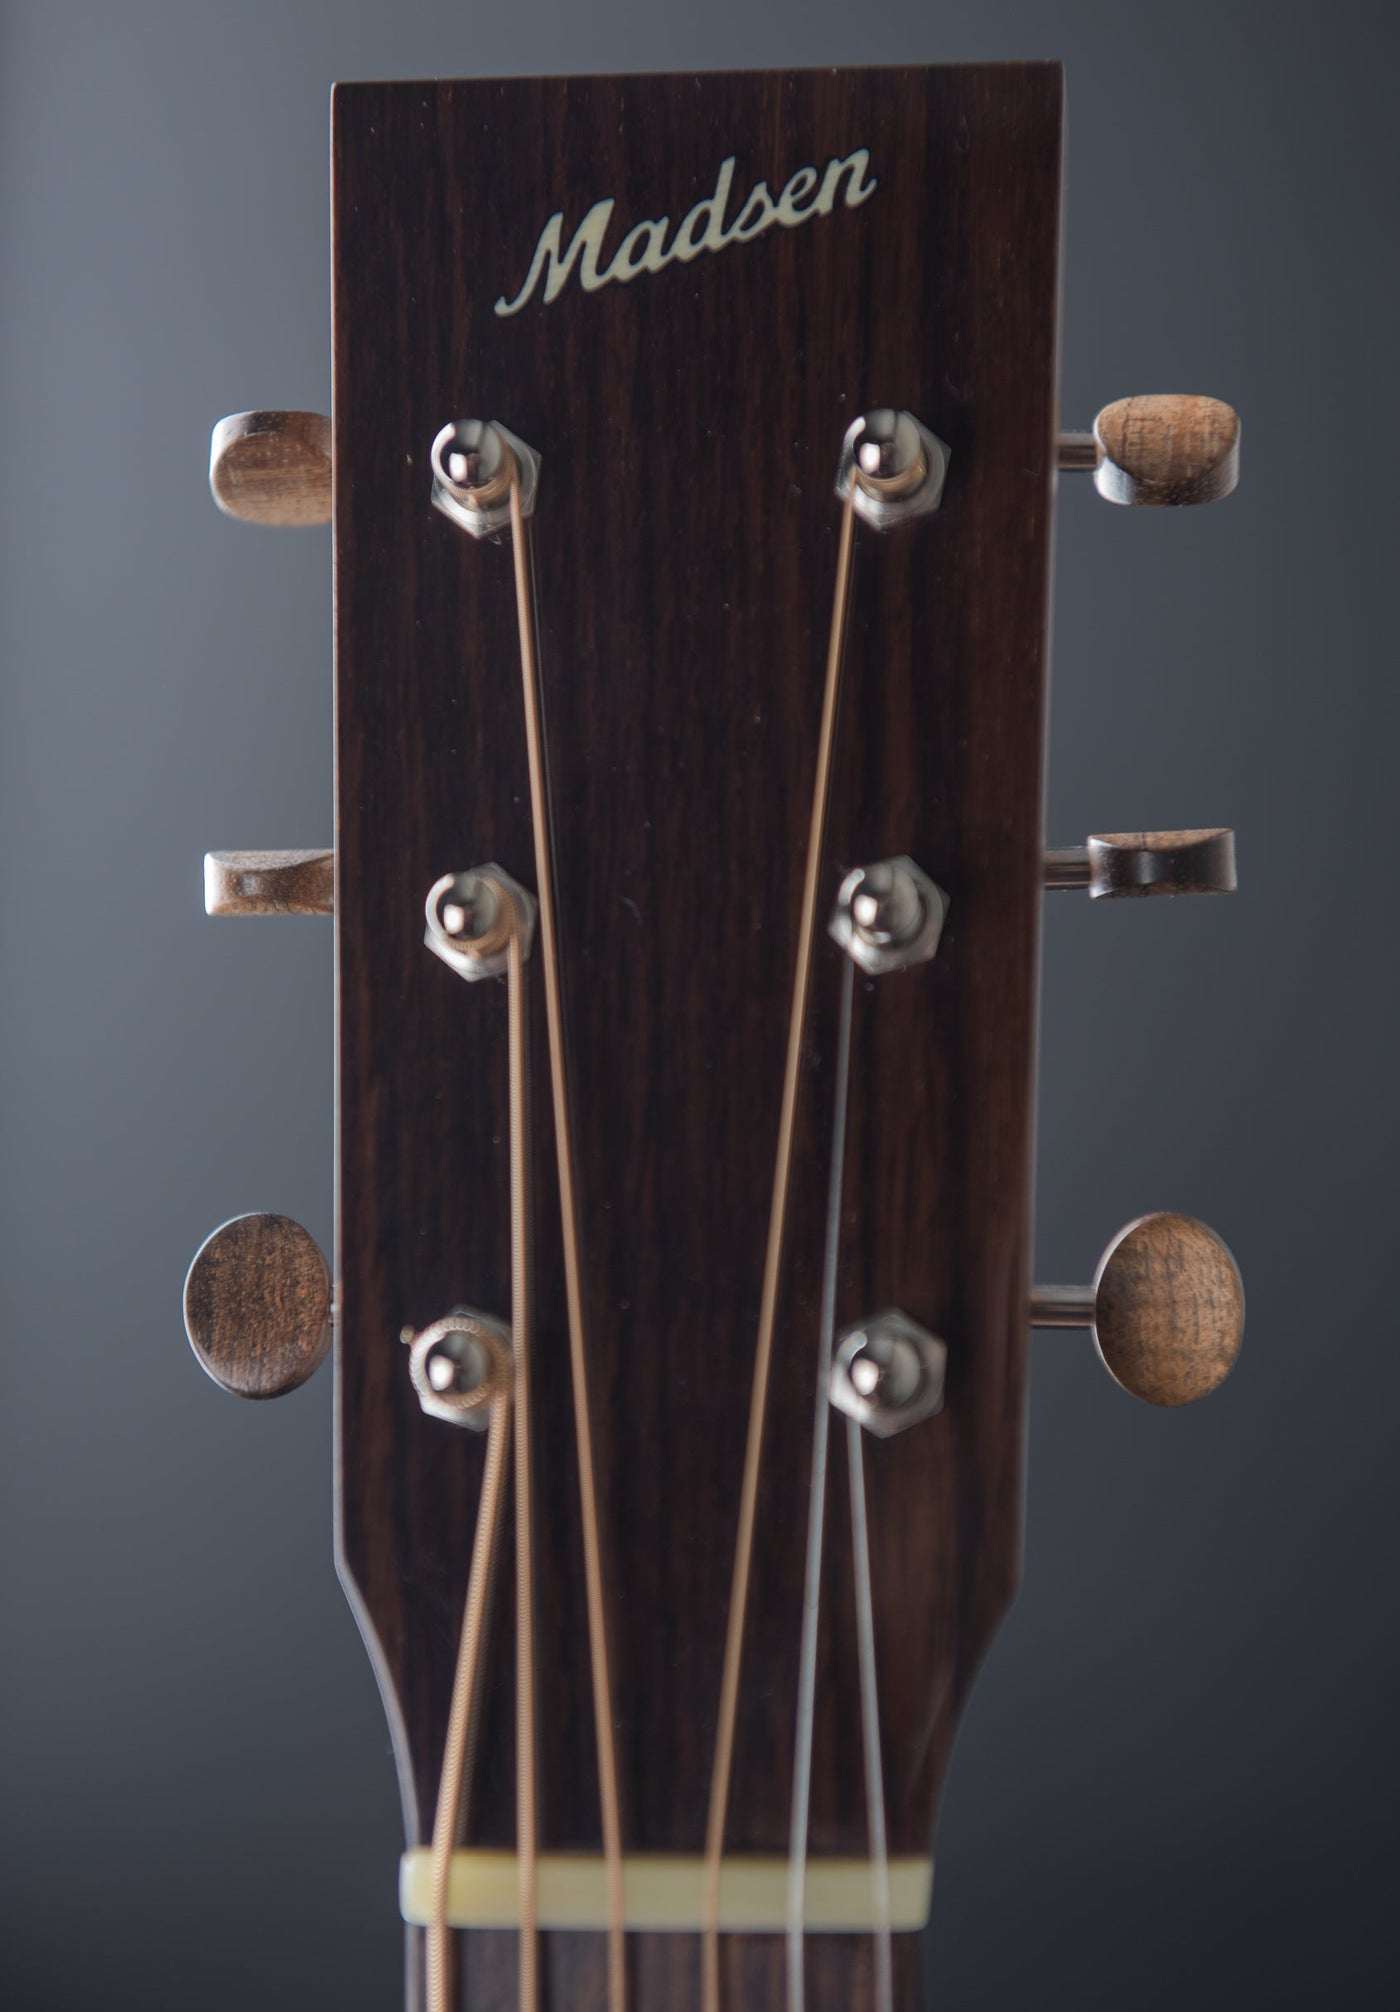 OMC, East Indian Rosewood/AAA Sitka Spruce